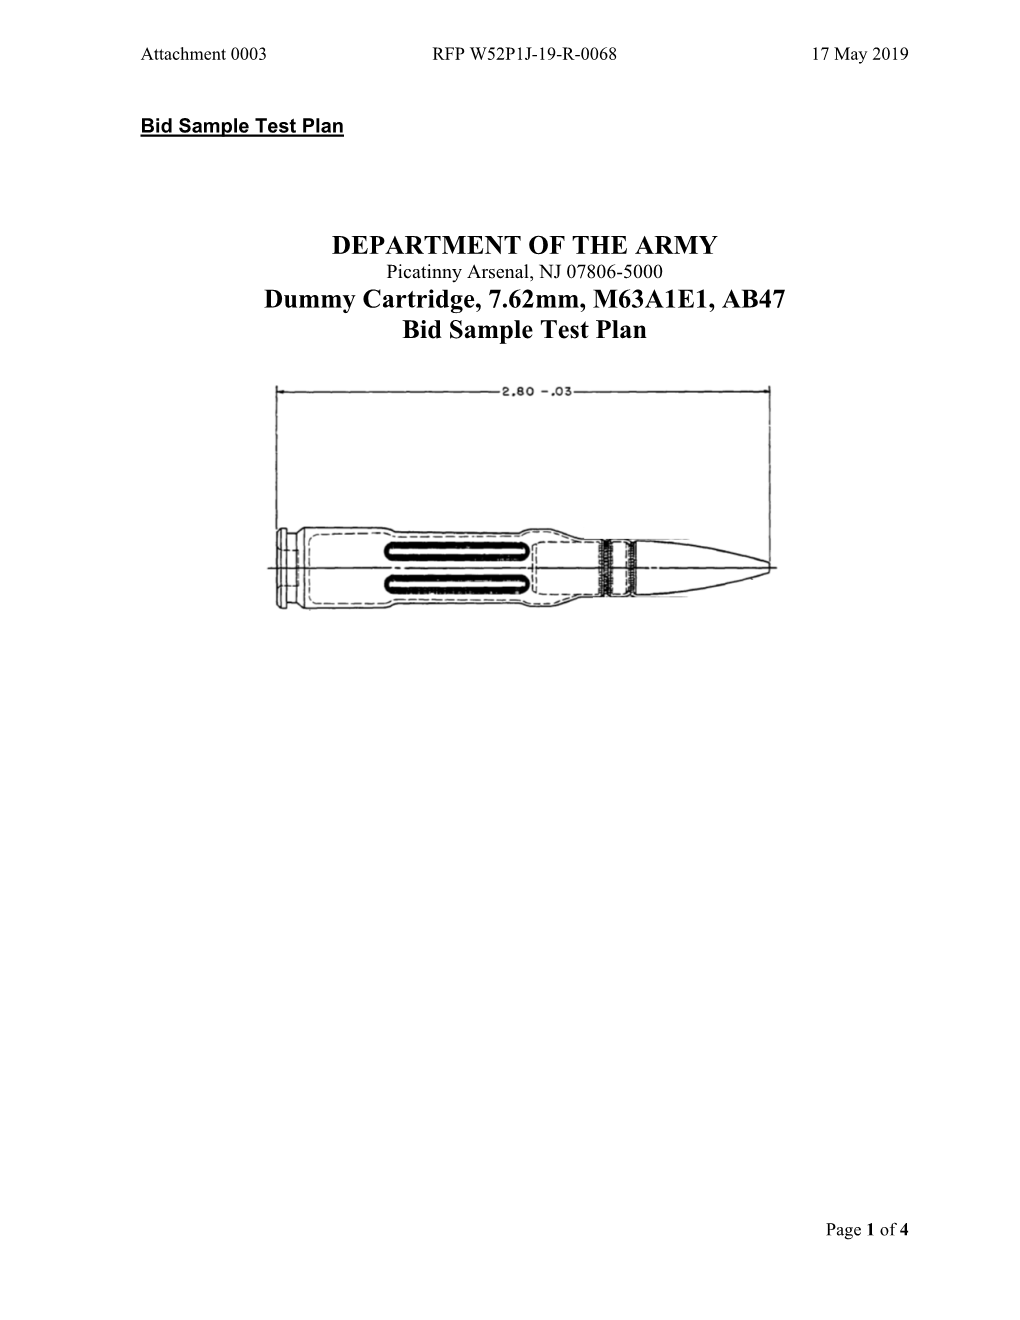 DEPARTMENT of the ARMY Dummy Cartridge, 7.62Mm